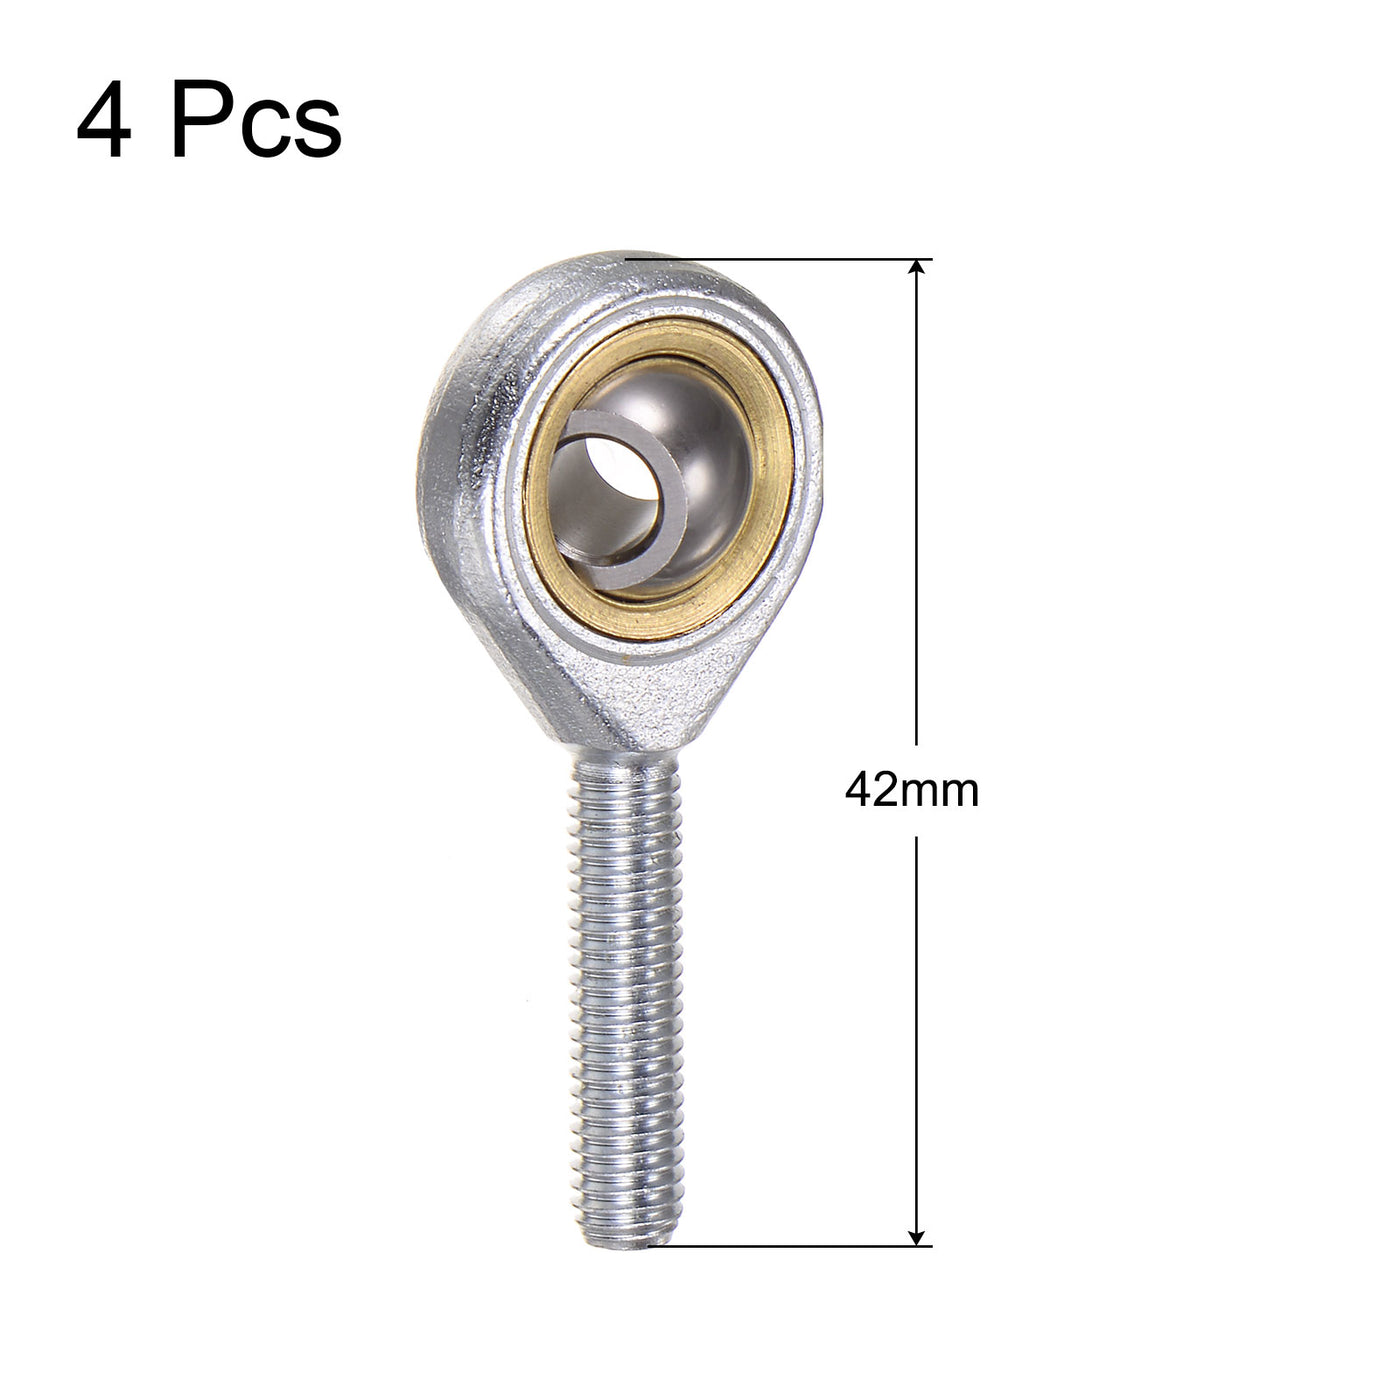 uxcell Uxcell 4pcs SA5TK POSA5 M5 Male Rod End M5x0.8 Right Hand Thread,Includes Jam Nut